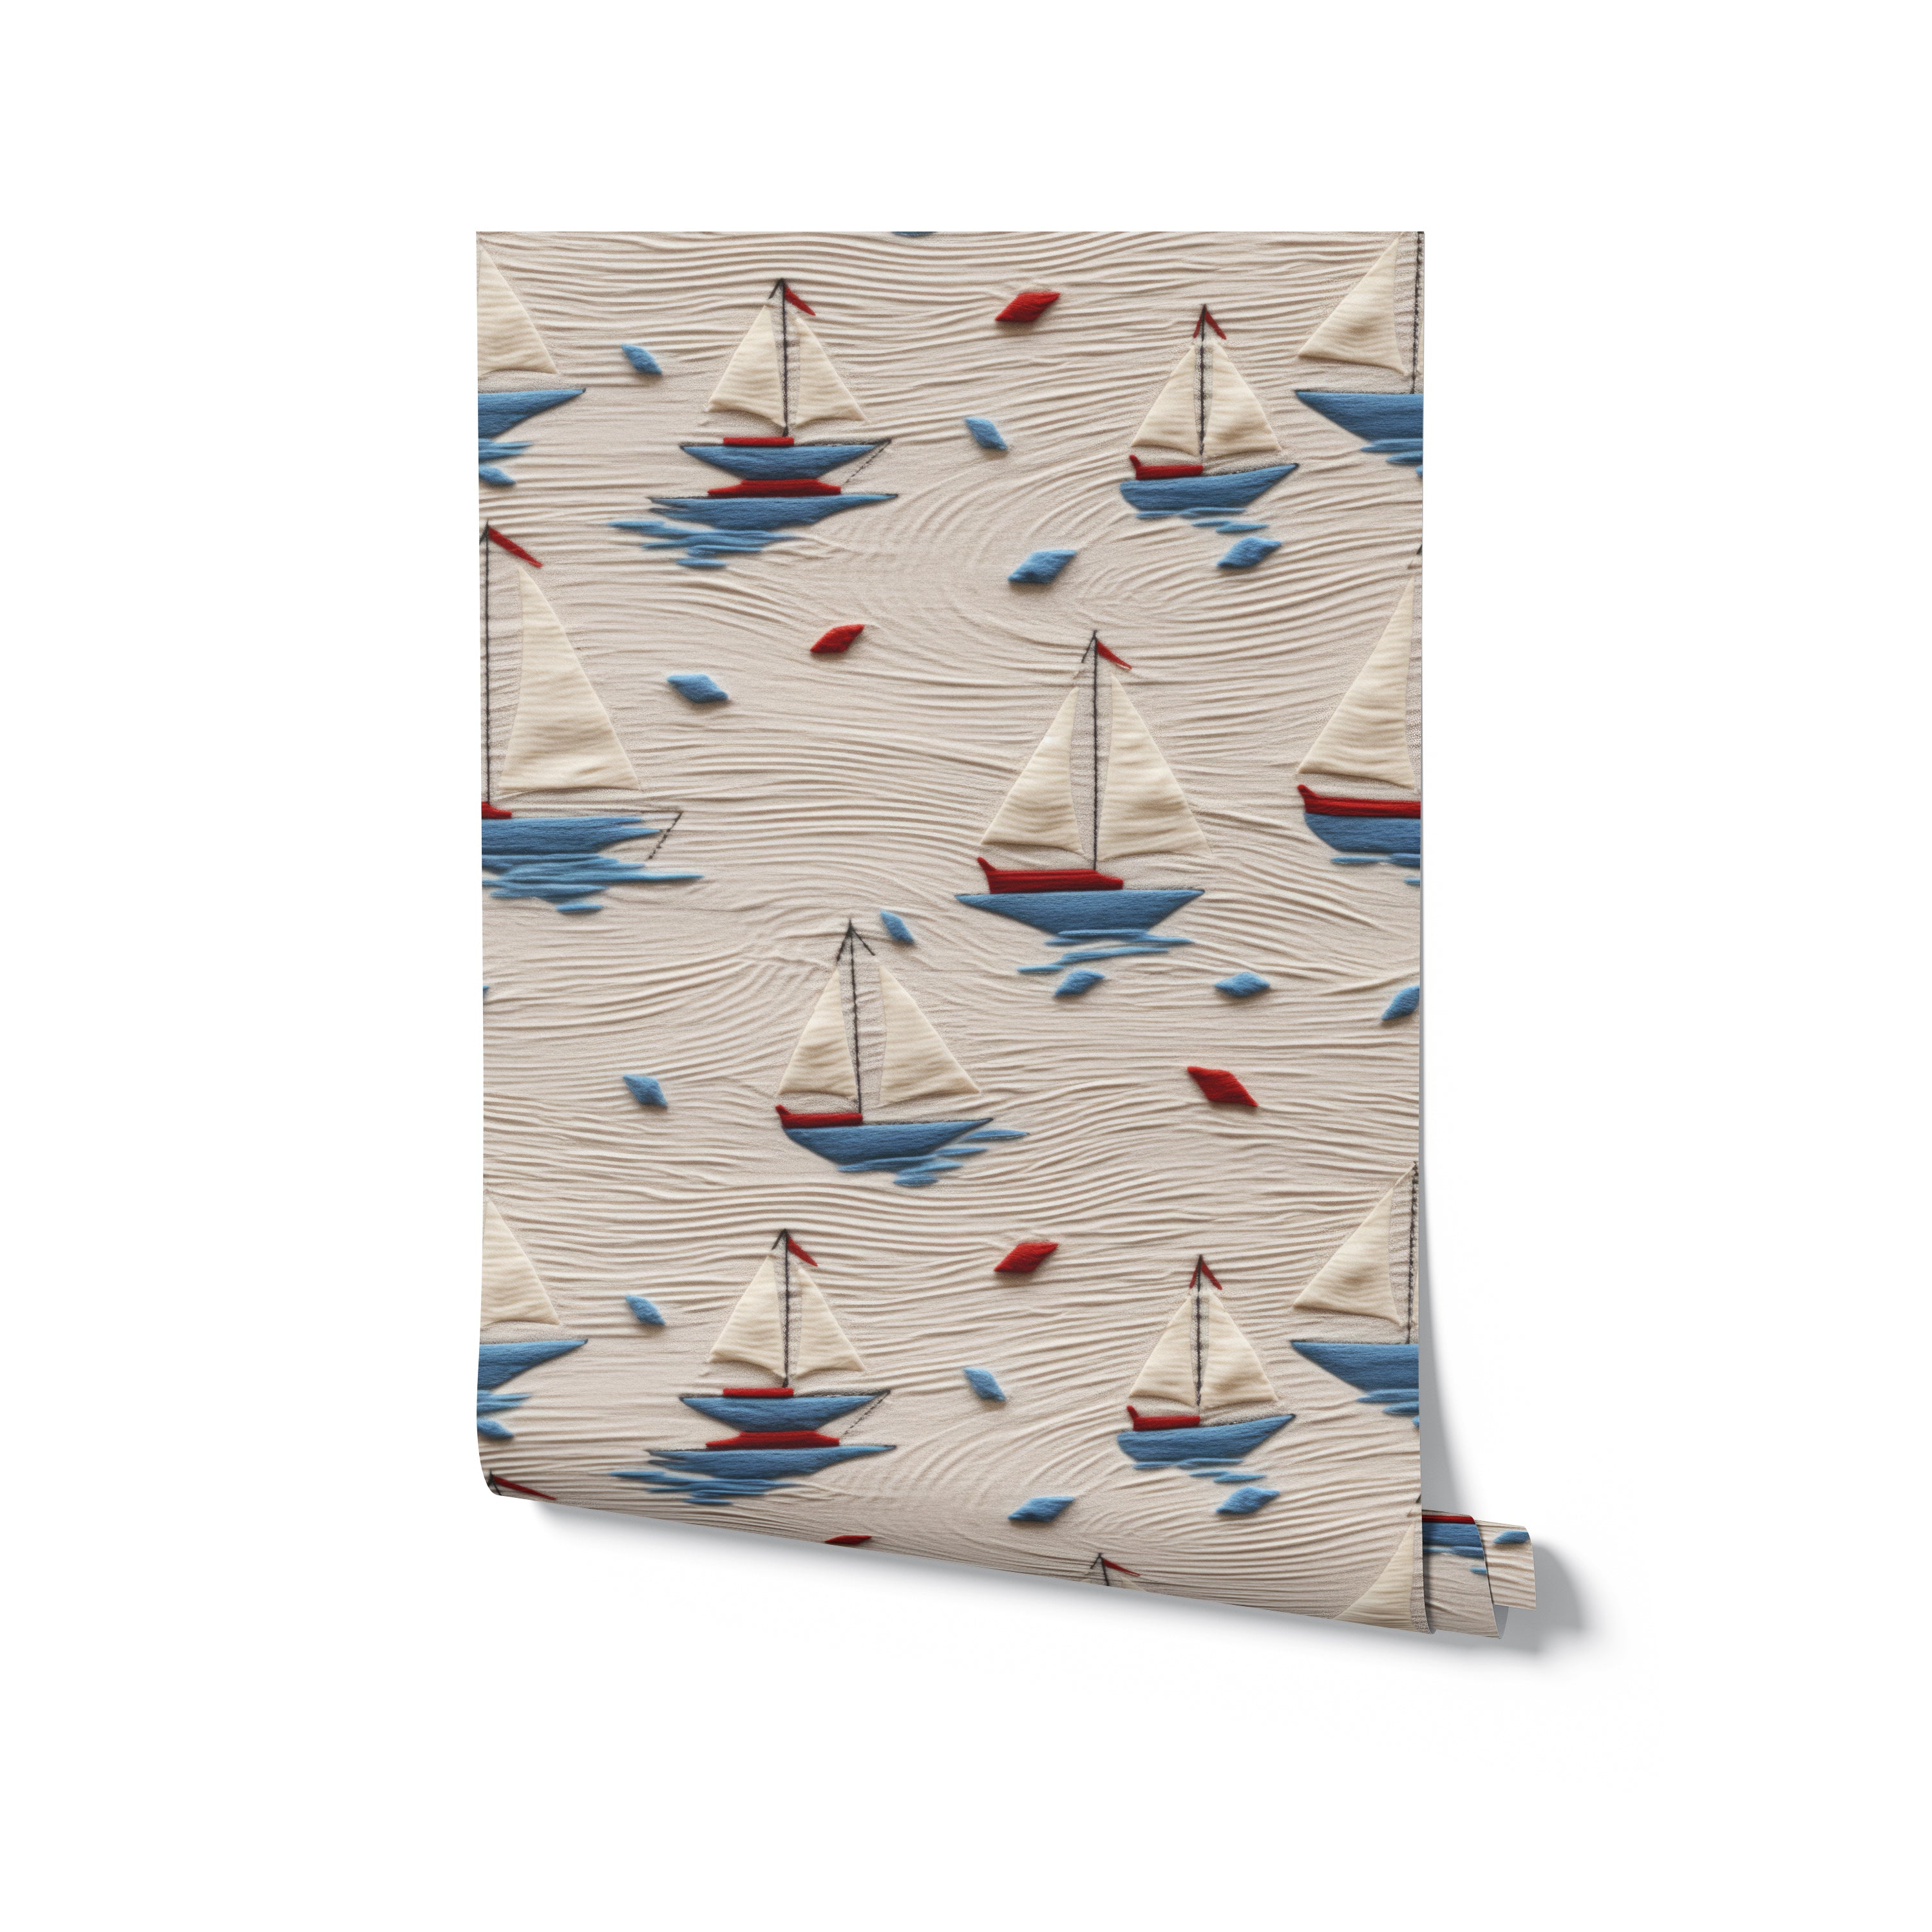 A roll of Windward Sail Wallpaper displaying a pattern of elegant sailboats with red and blue accents on a beige, sandy background, ideal for adding a nautical charm to any space, from bedrooms to play areas.